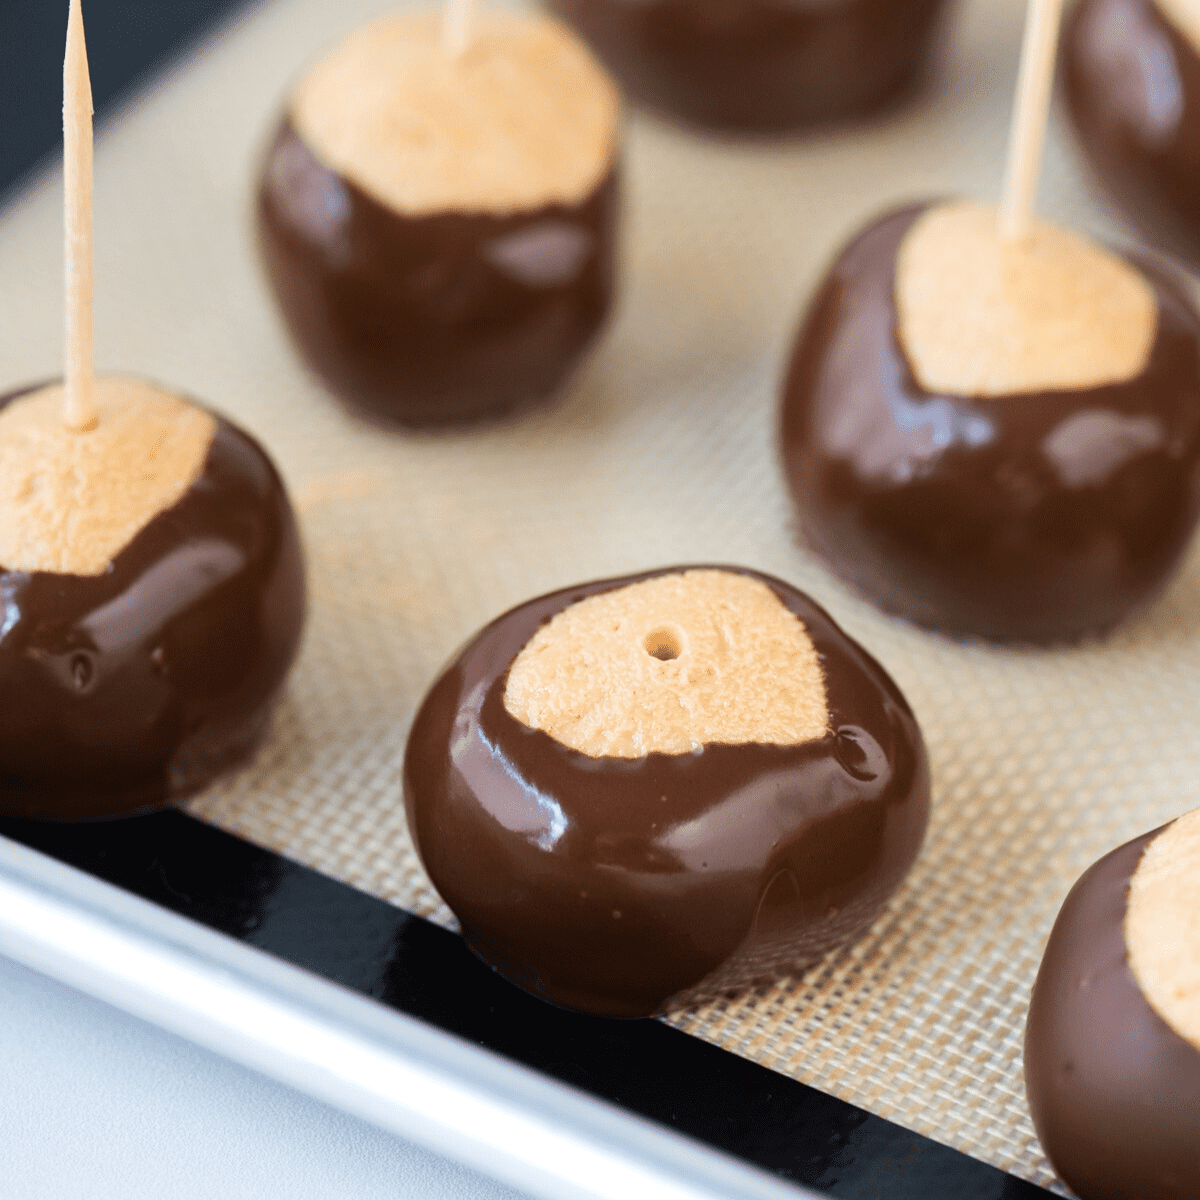 peanut butter ball freshly dipped in chocolate